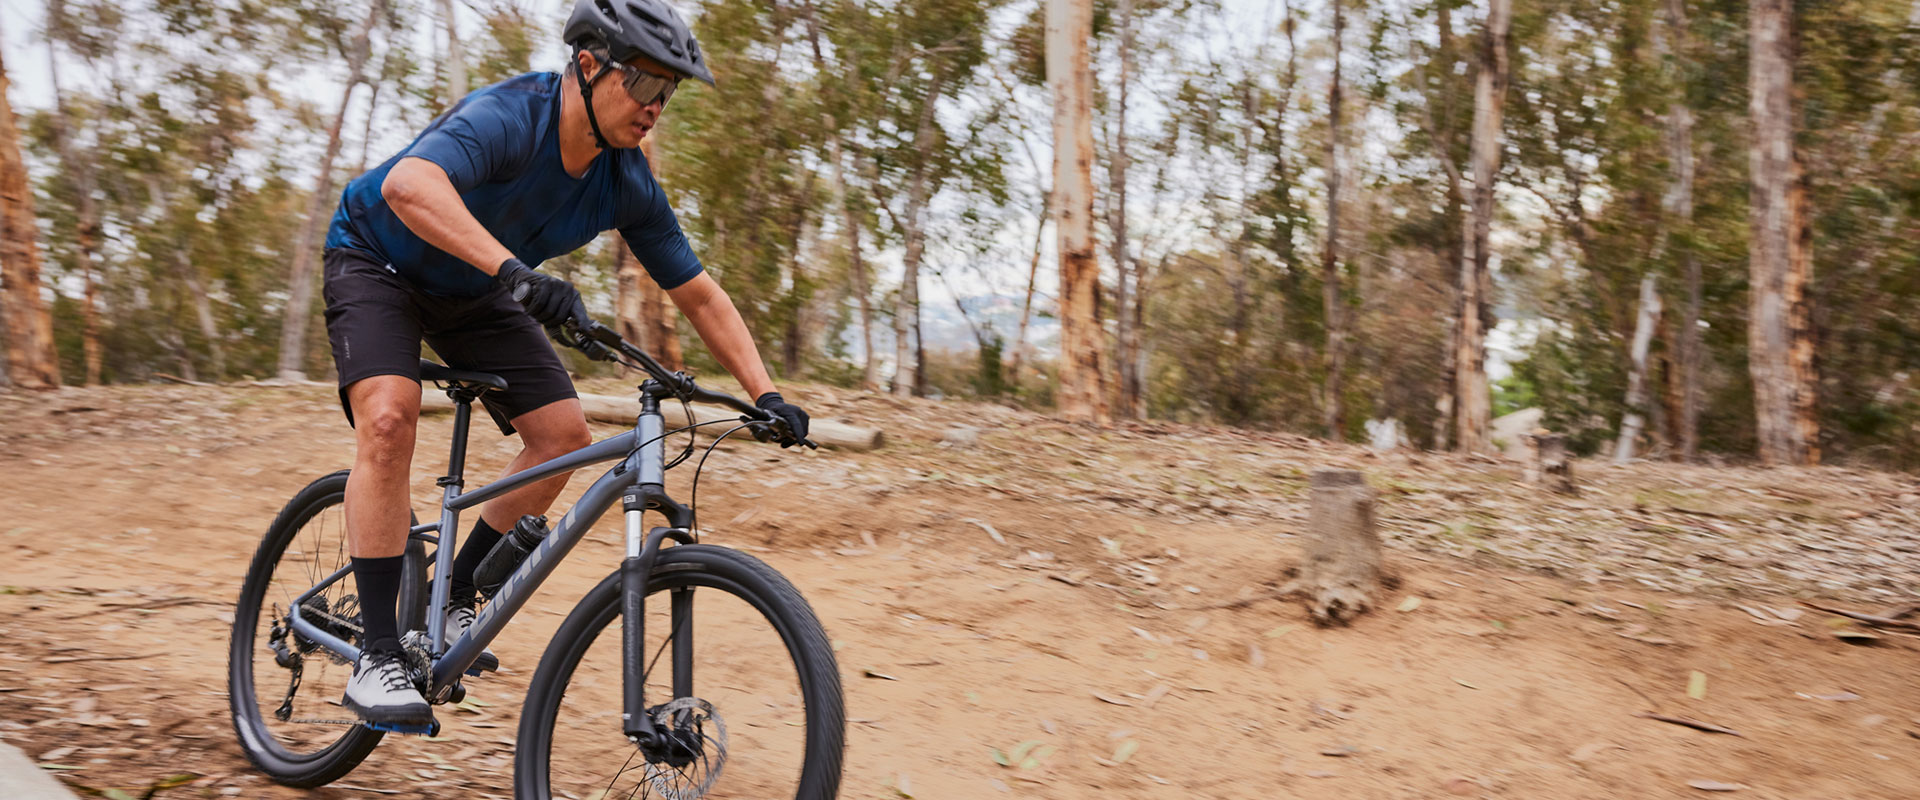 Talon | Giant Bicycles Official site